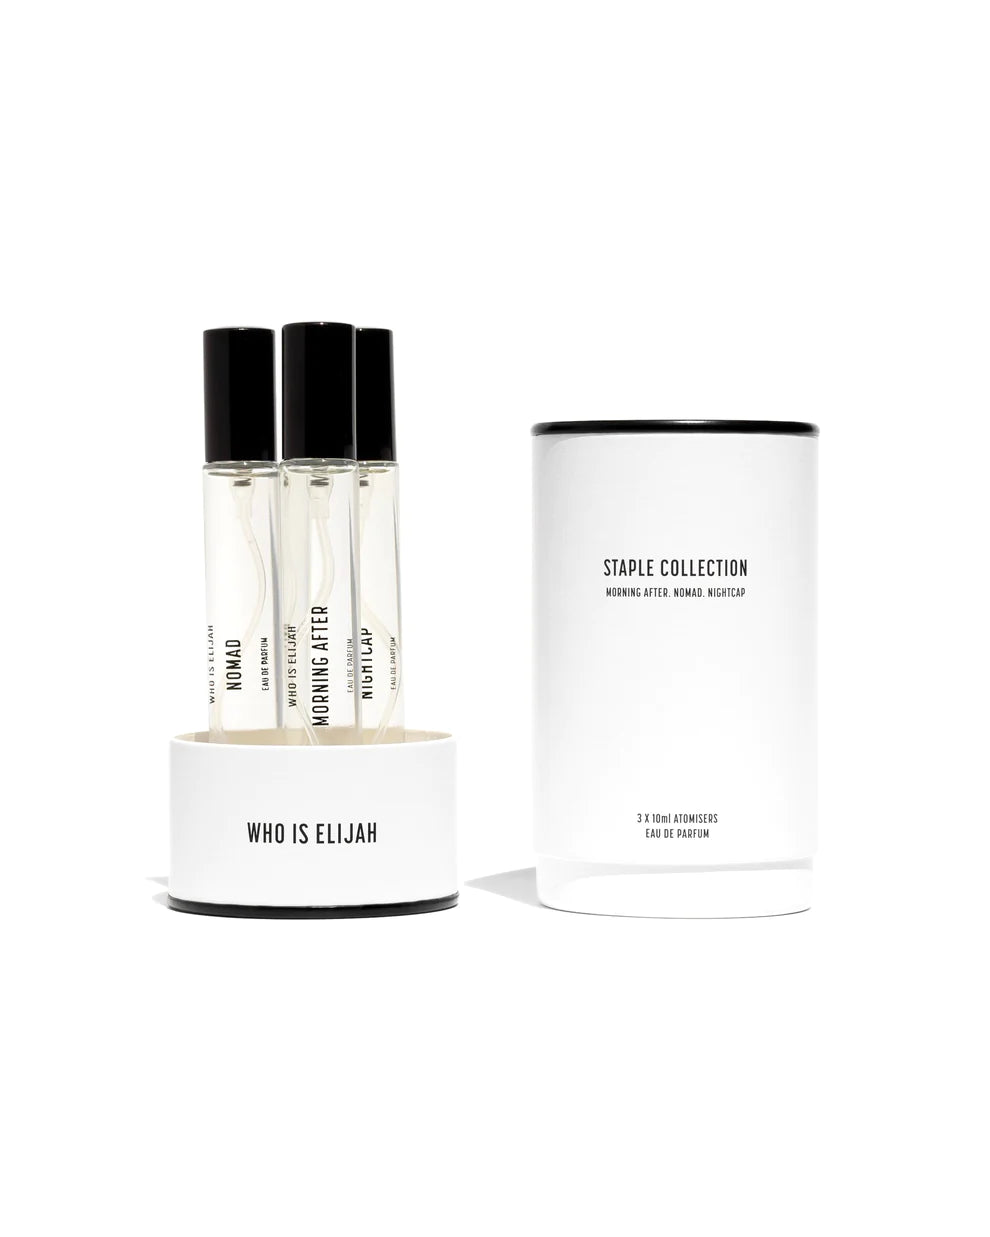 FRAGRANCE Staple Collection TRIO - Exquisite Laser Clinic 